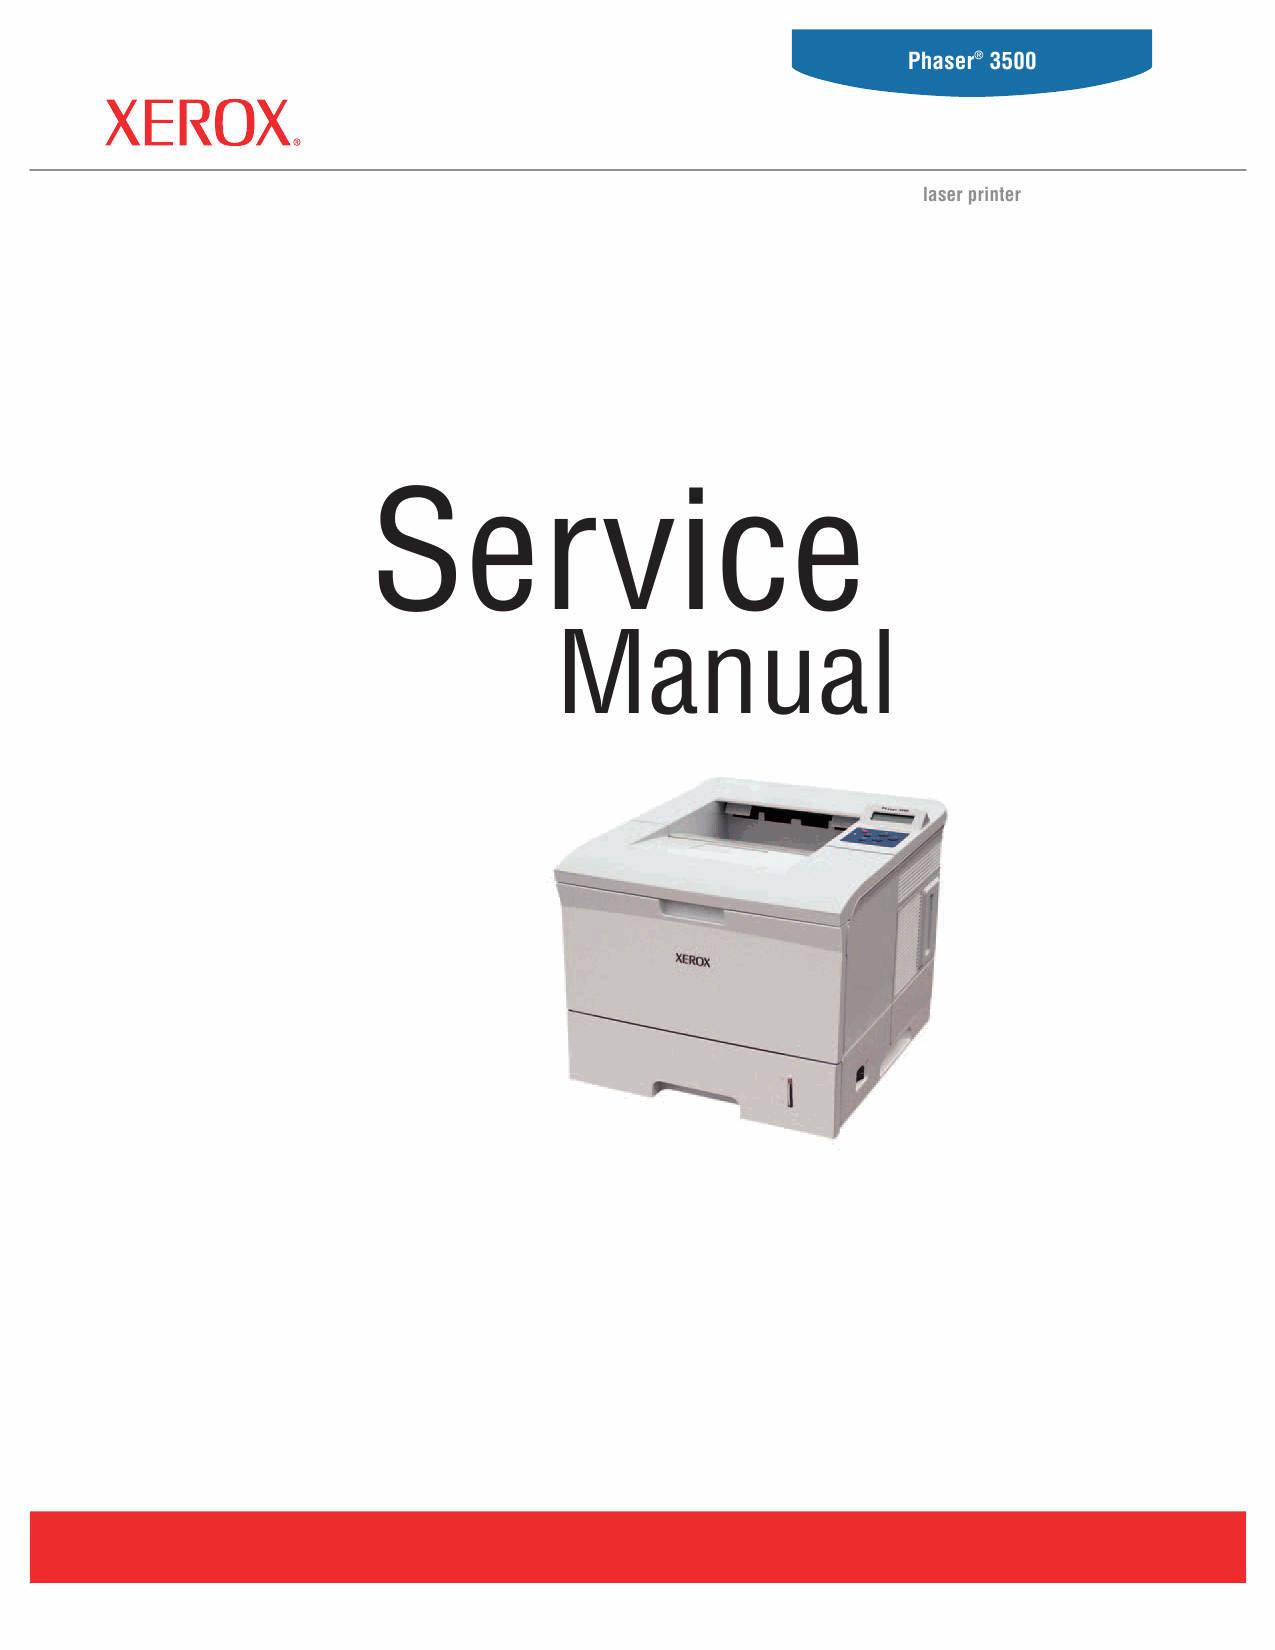 Xerox Phaser 3500 Parts List and Service Manual-1